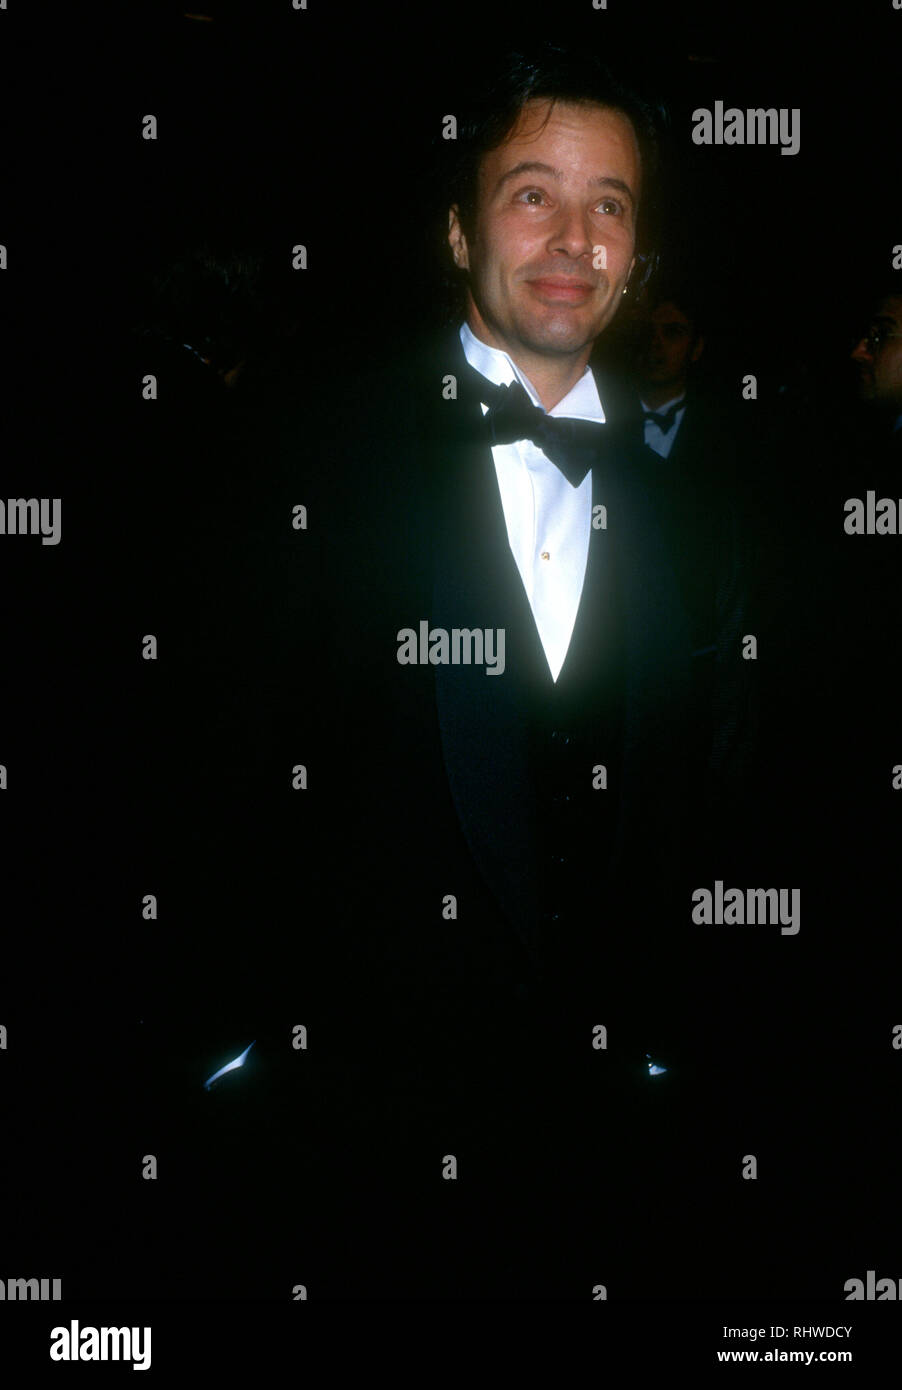 CENTURY CITY, CA - DECEMBER 9: Actor Philip Casnoff attends the opening night of 'Sunset Blvd' on December 9, 1993 at the Shubert Theater in Century City, California. Photo by Barry King/Alamy Stock Photo Stock Photo